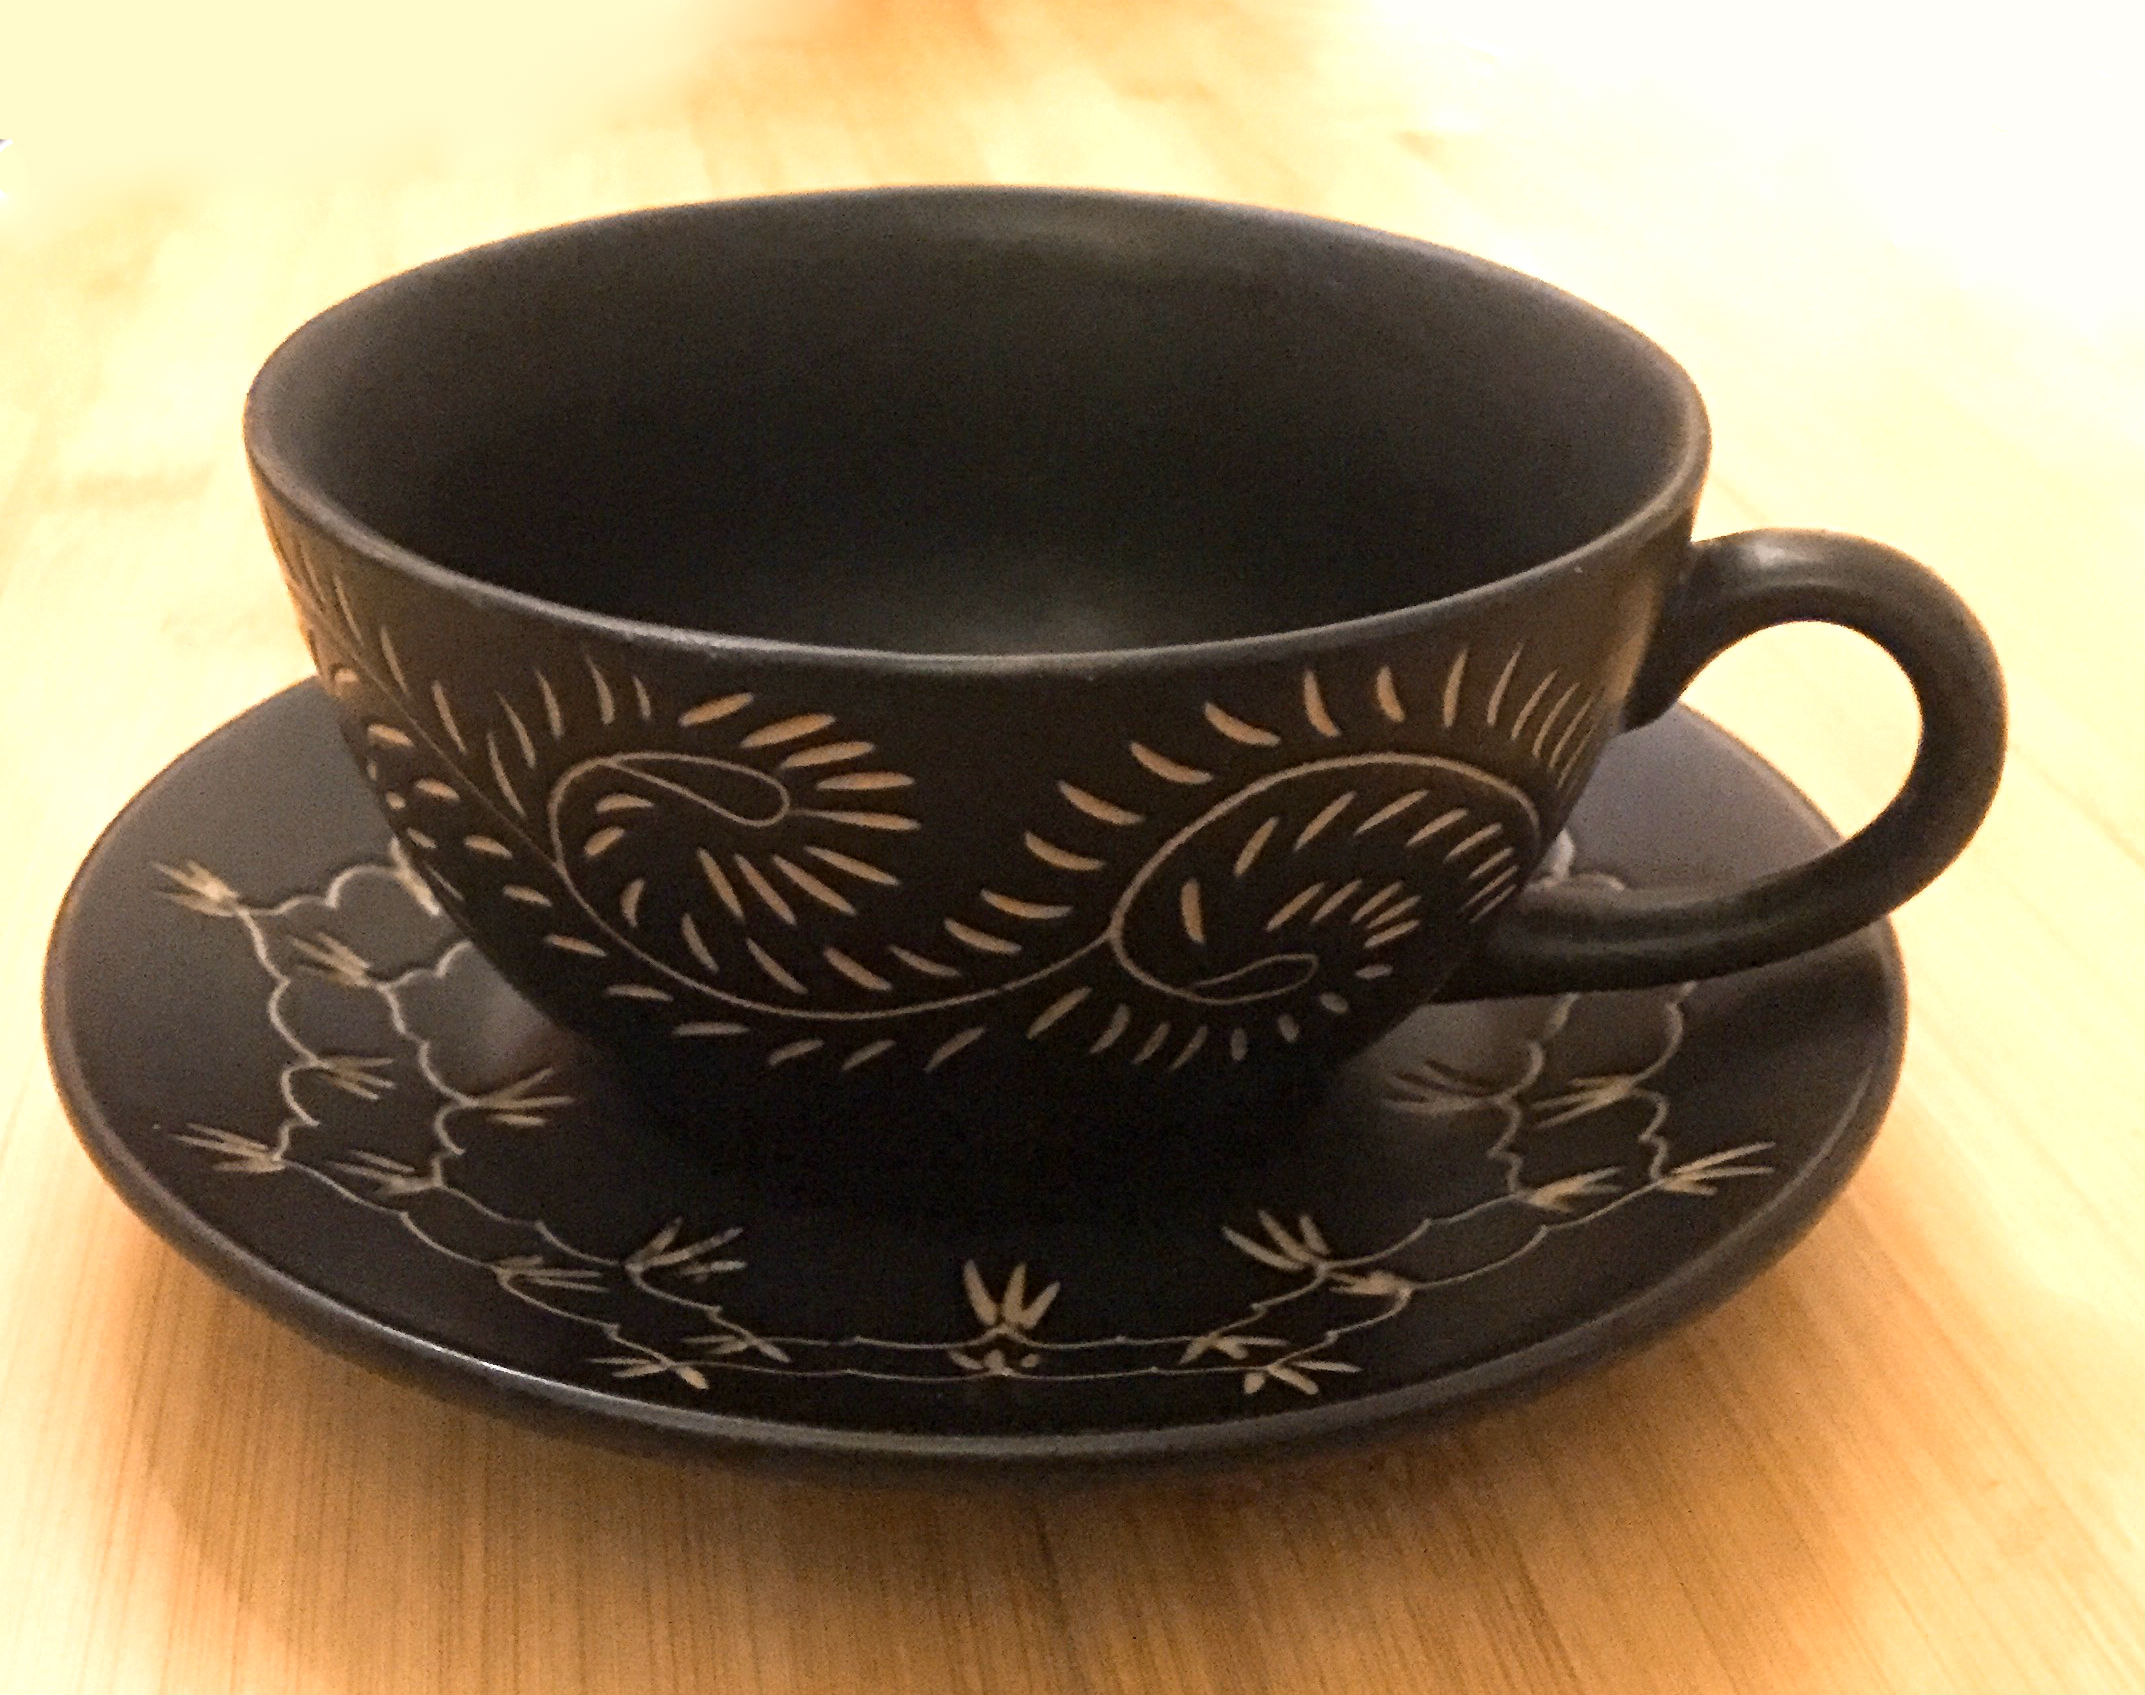 The perfect cup and saucer for Chai!